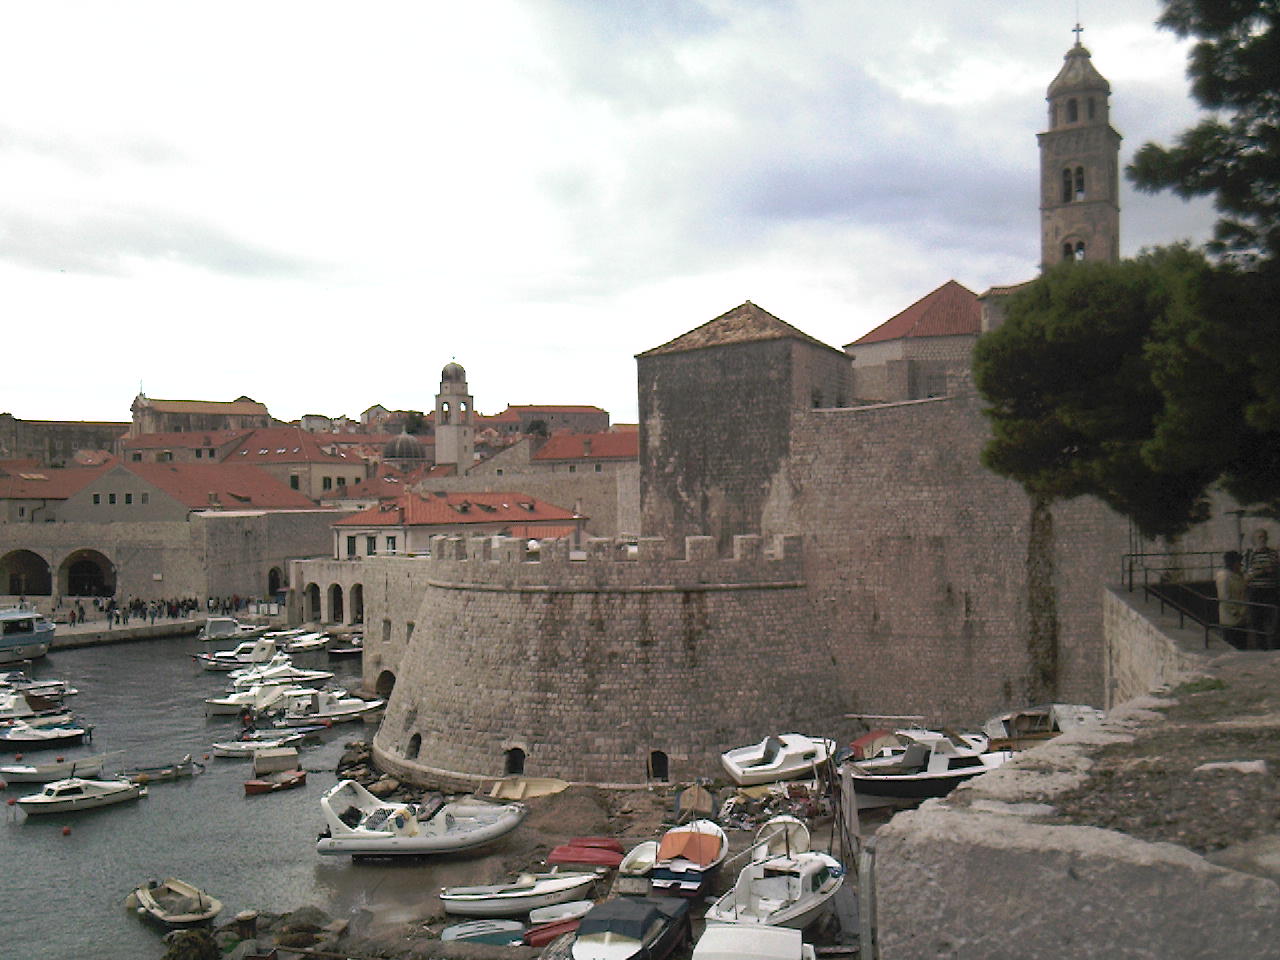 Dubrovnik, formerly known as Ragusa